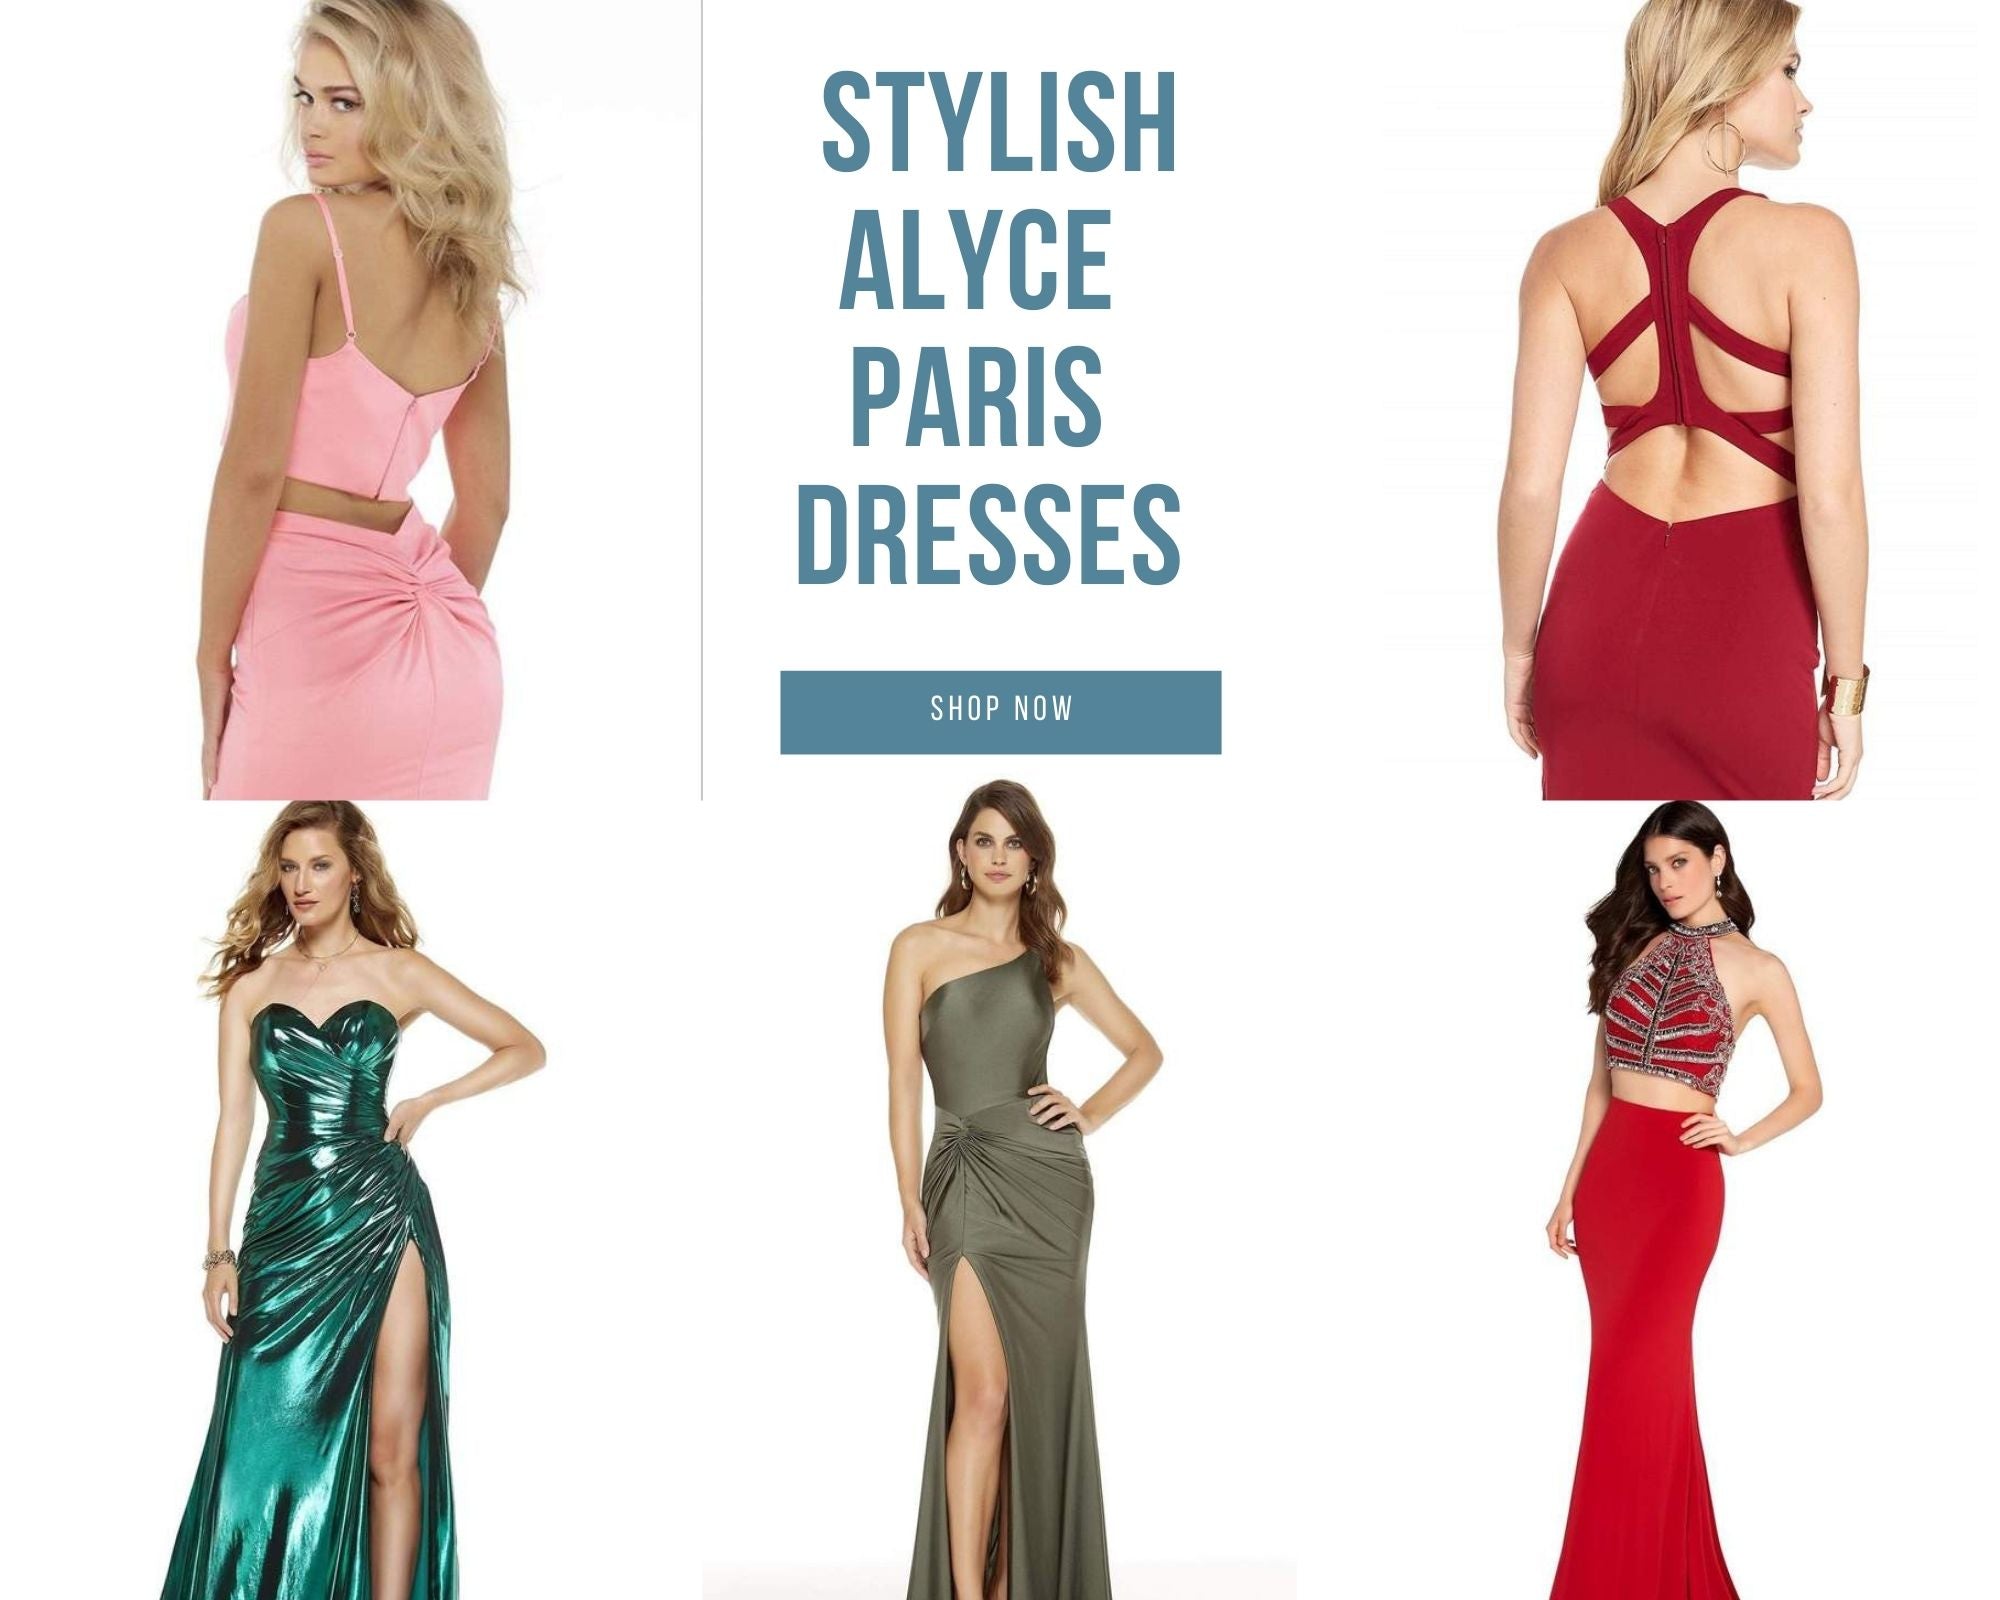 Stylish Alyce Paris Dresses Ideal for Your Body Type